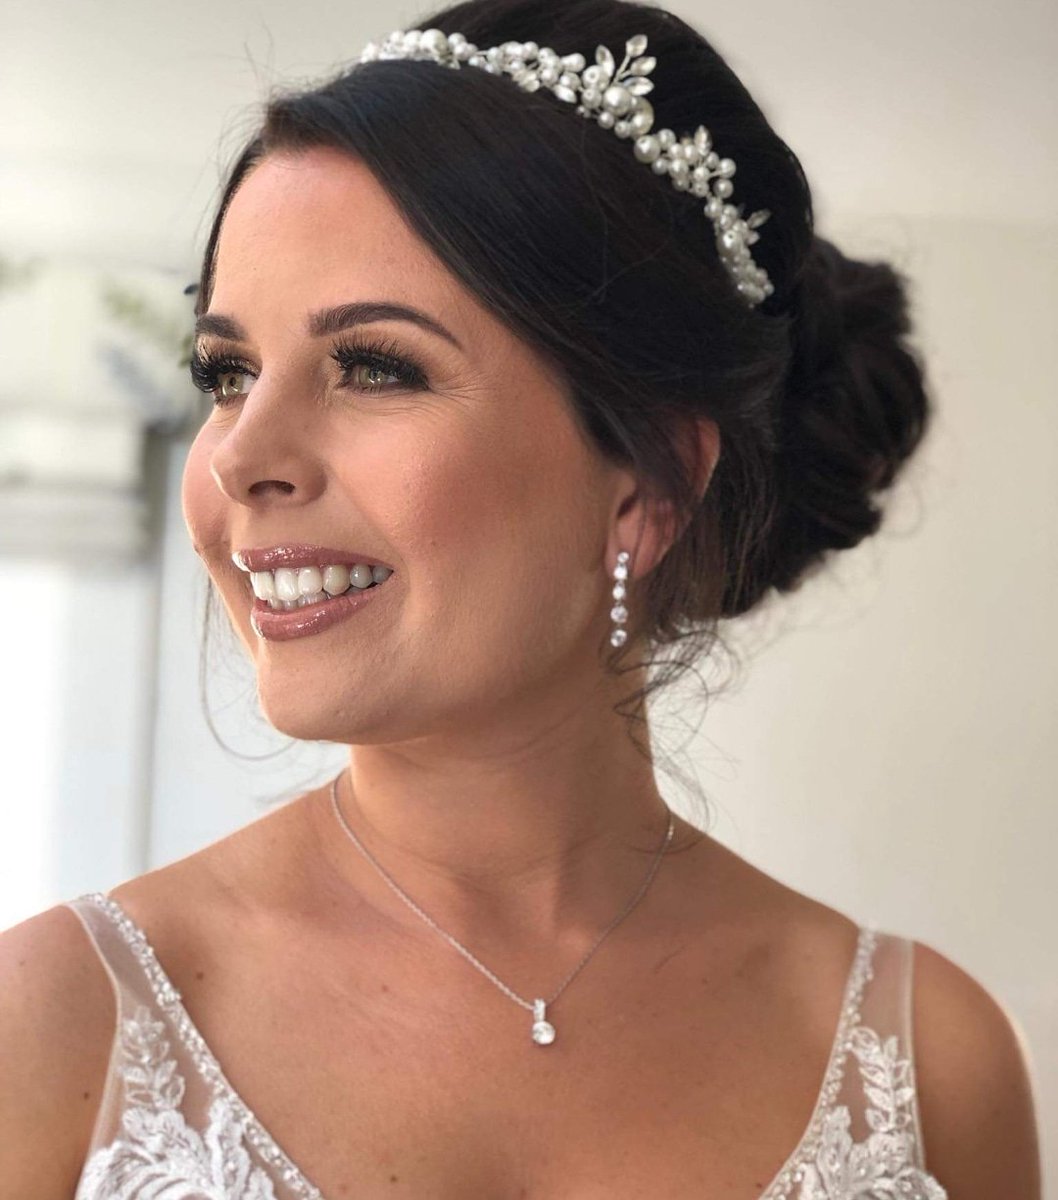 Yesterday's stunning bride Lyndsay ❤️👰
Thank you for choosing me to be your Artist on your special day.💞

#makeup #mua #makeupartist #wedding #weddinggoals #weddingglam #rockyourwedding #weddingmakeup #manchester #manchesterweddings #cheshire #cheshireweddings  #bridalglam